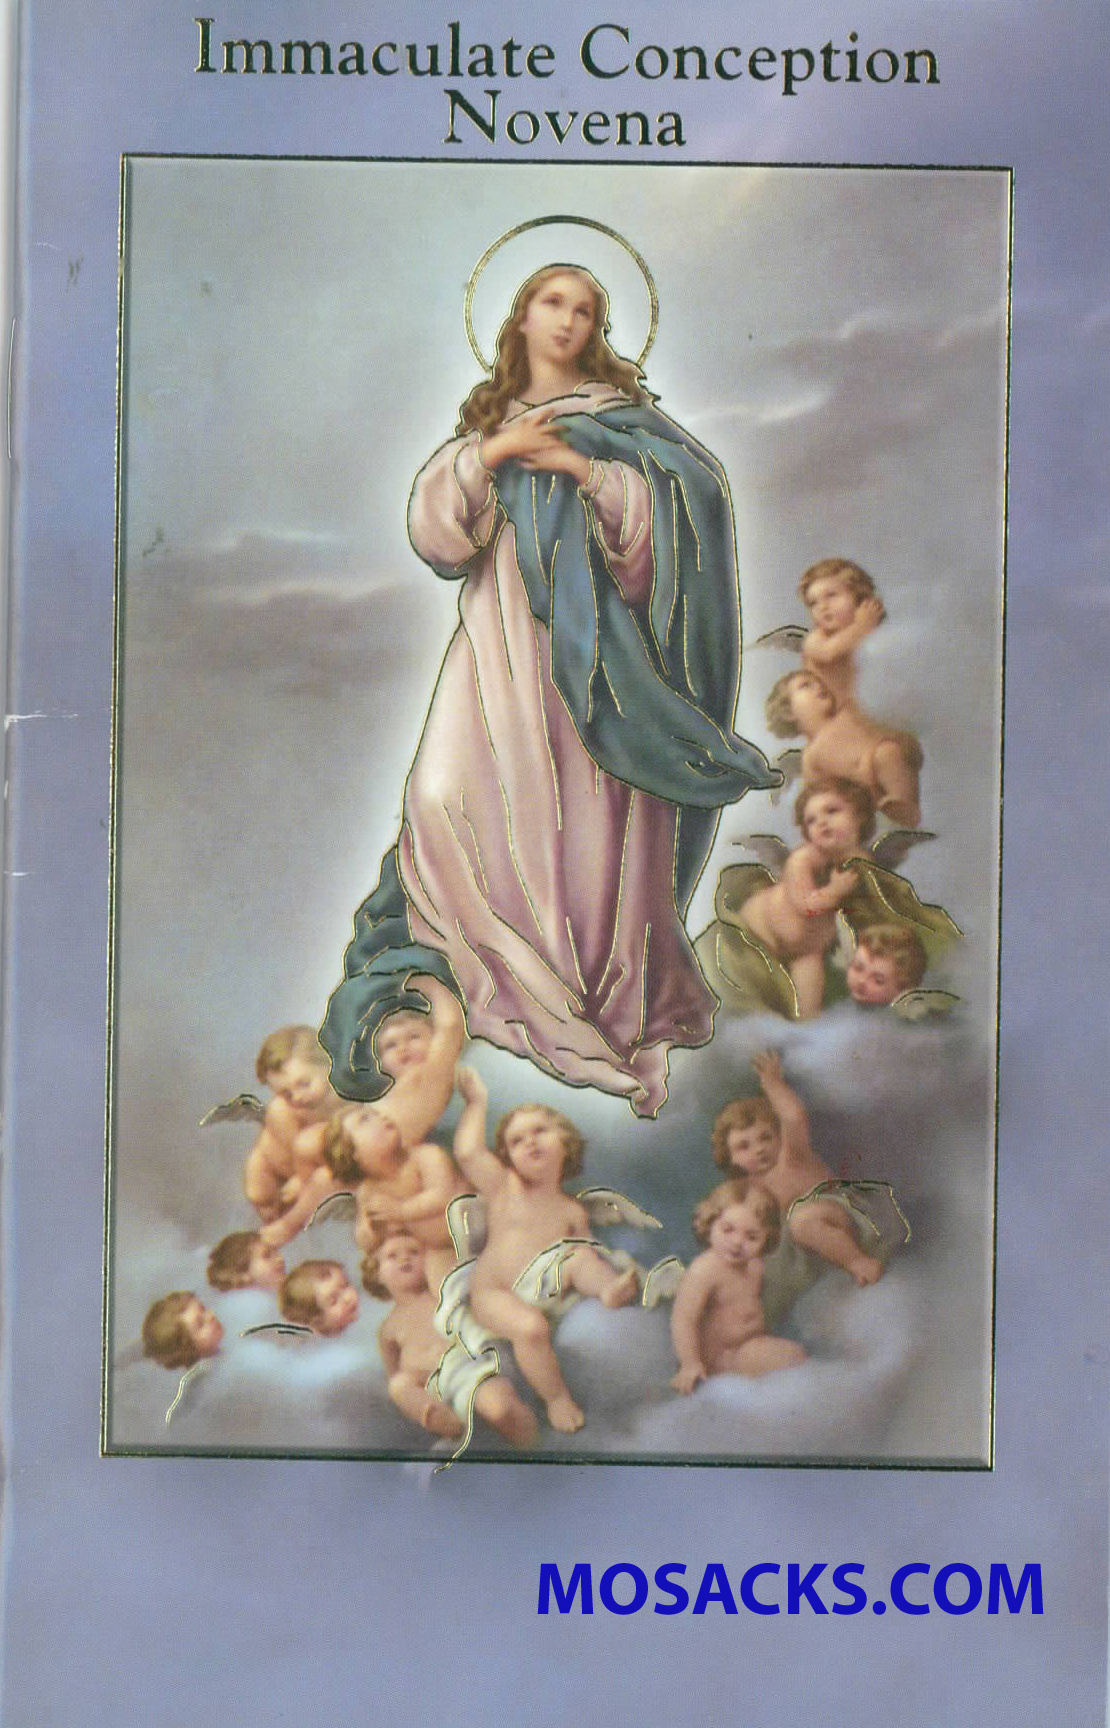 Immaculate Conception Novena Prayer Book with Prayers 12-2432-251